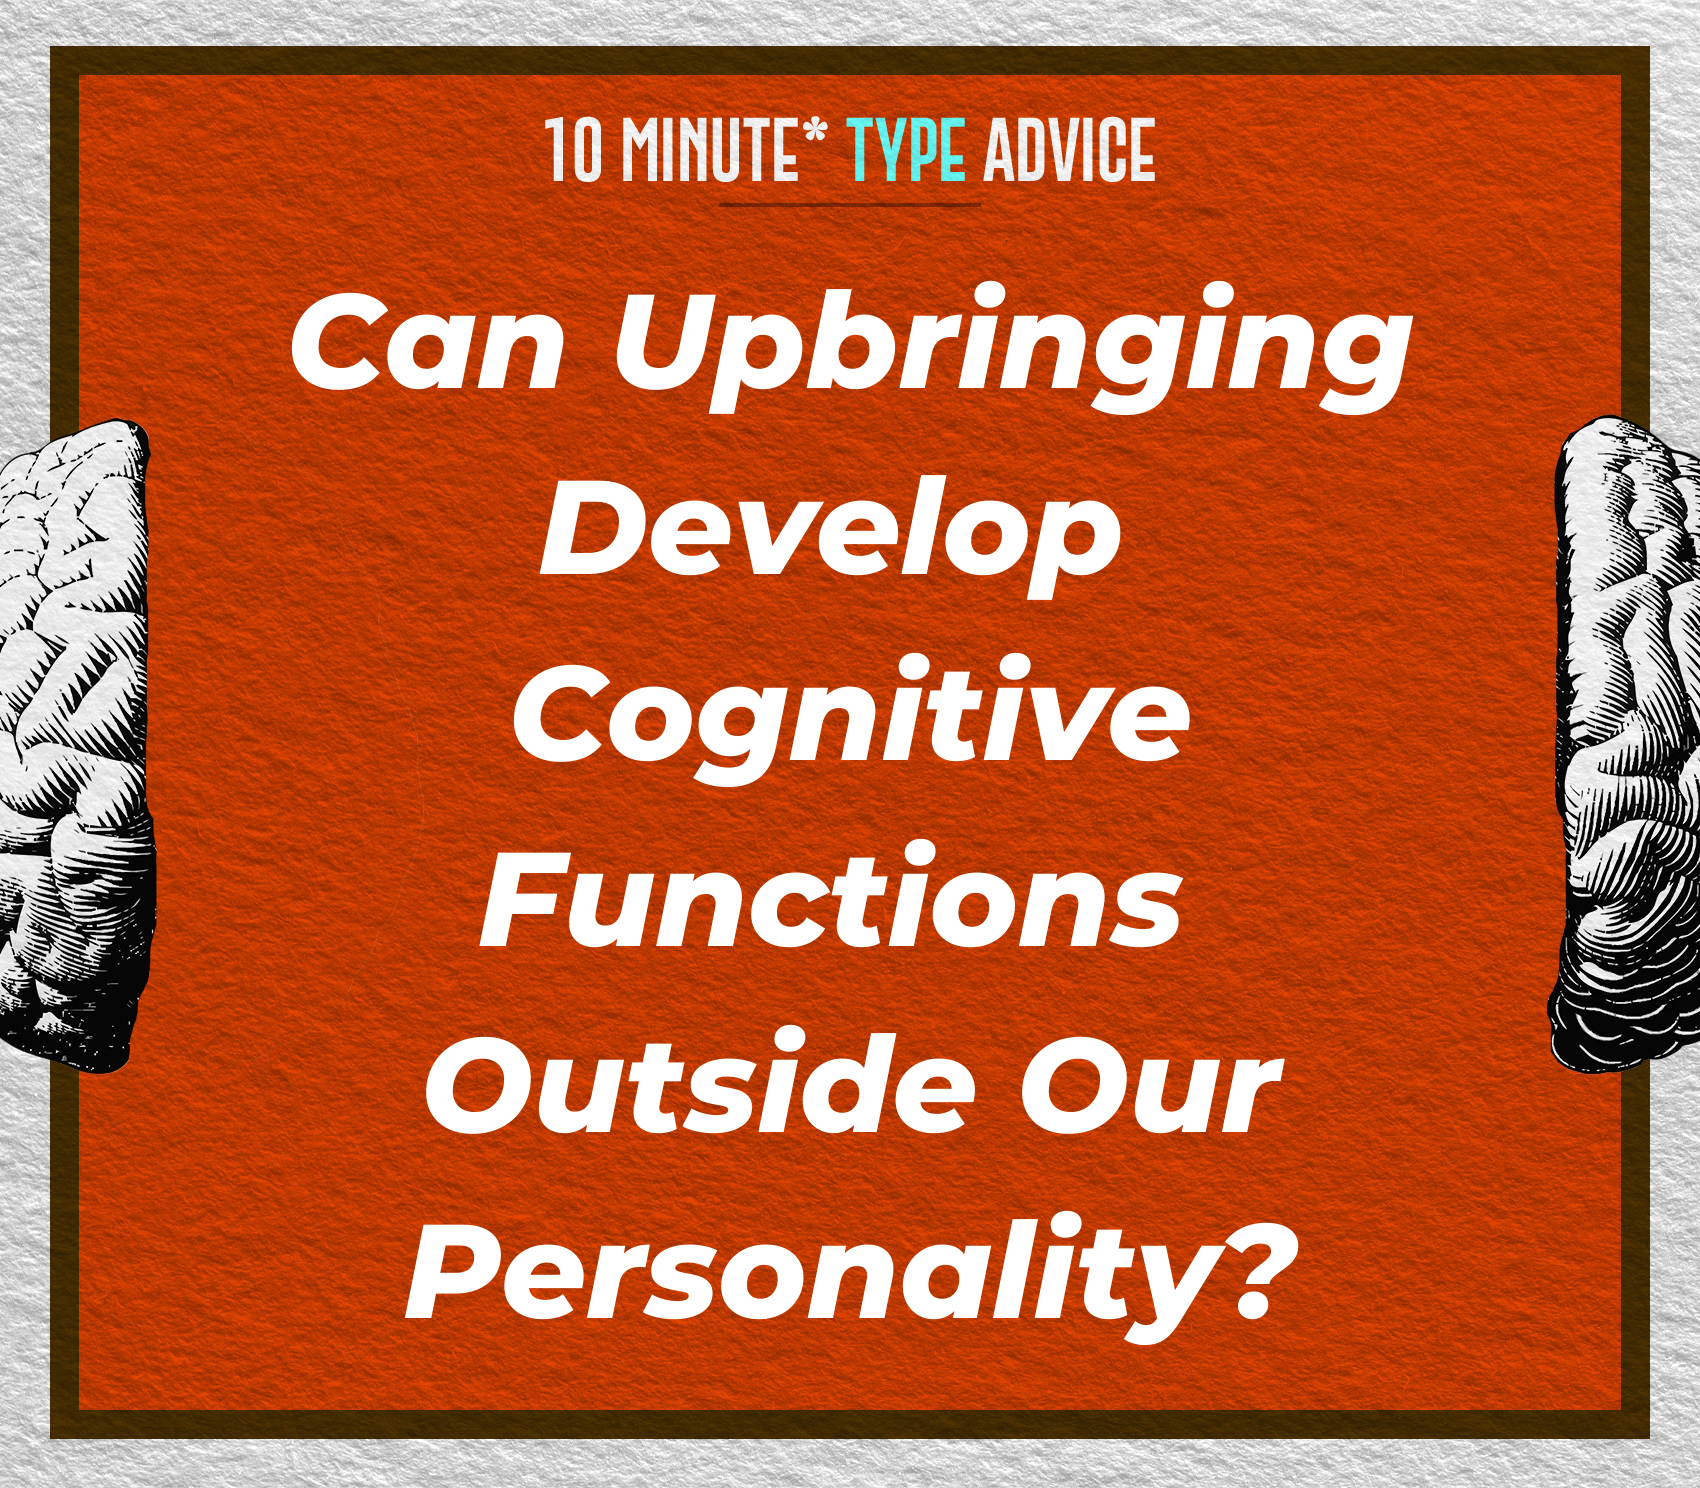 Can Upbringing Develop Cognitive Functions Outside Our Personality?  | 10 Min Type Advice | S03:06